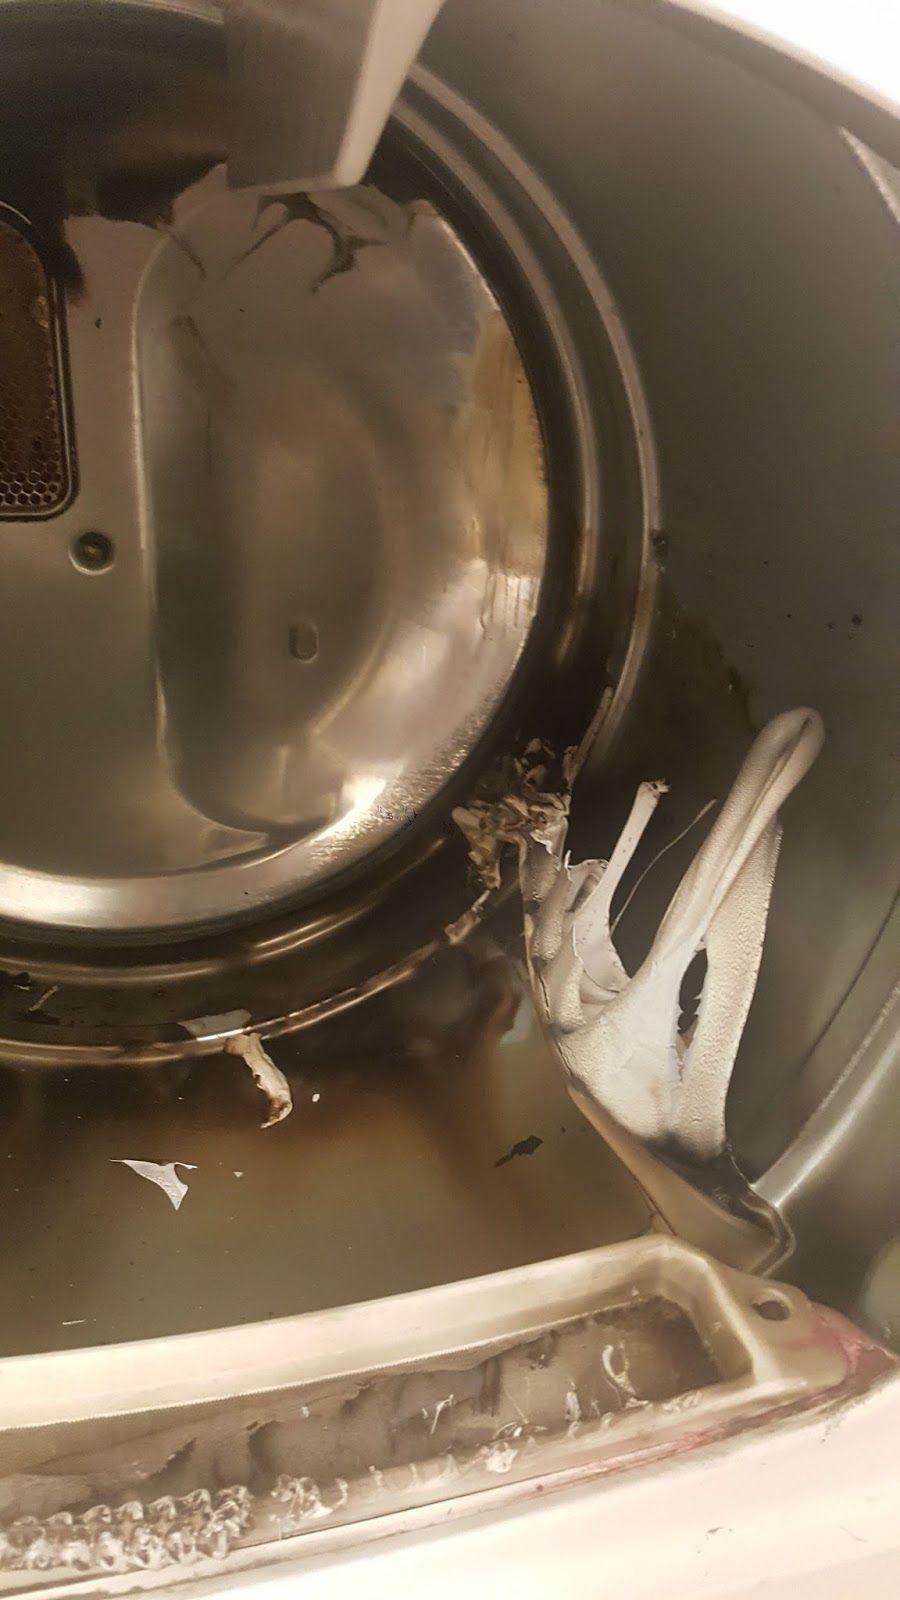 Uncleaned stovetop